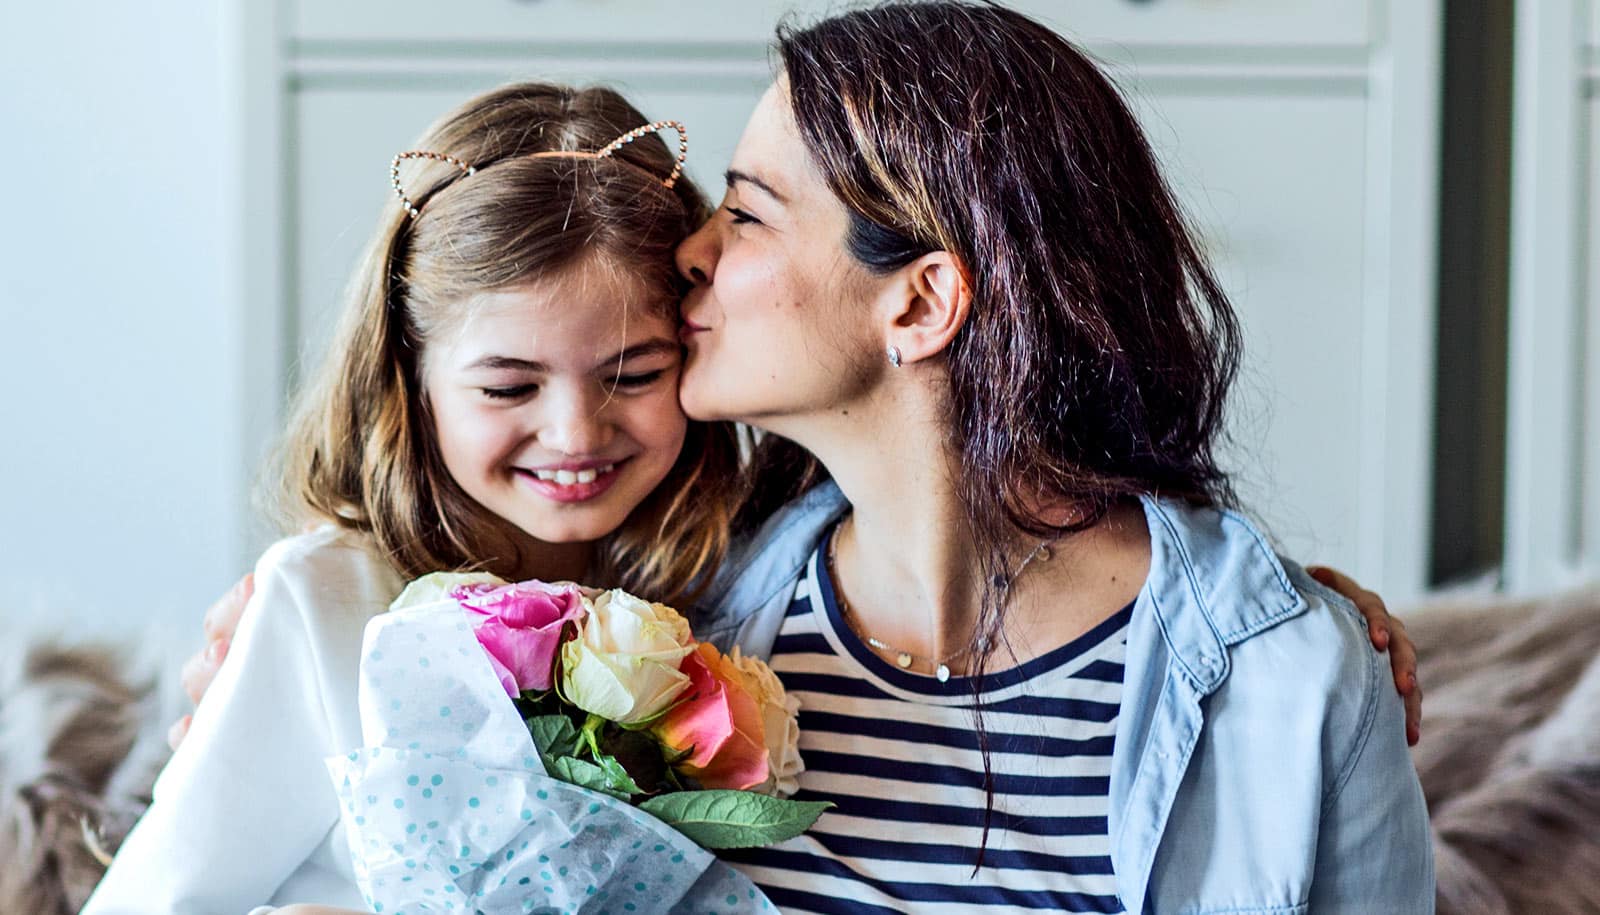 When did we start giving flowers for Mother’s Day? | WordDisk